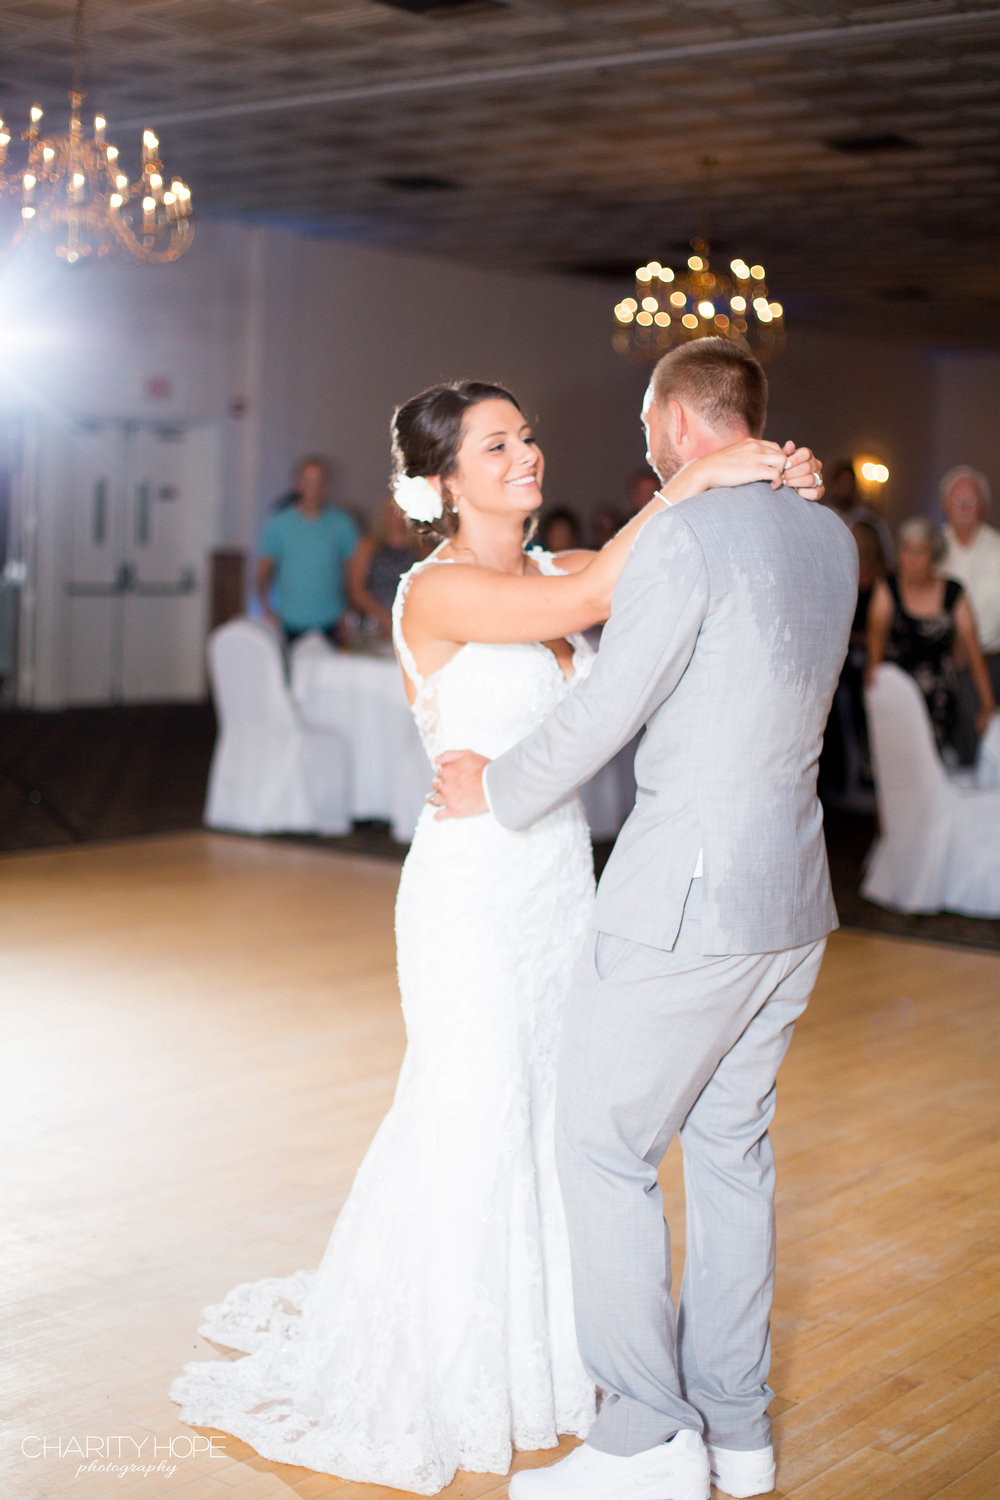  The first dance as Mr. + Mrs. They danced to the song 'Say You Won’t Let Go' by James Arthur. 